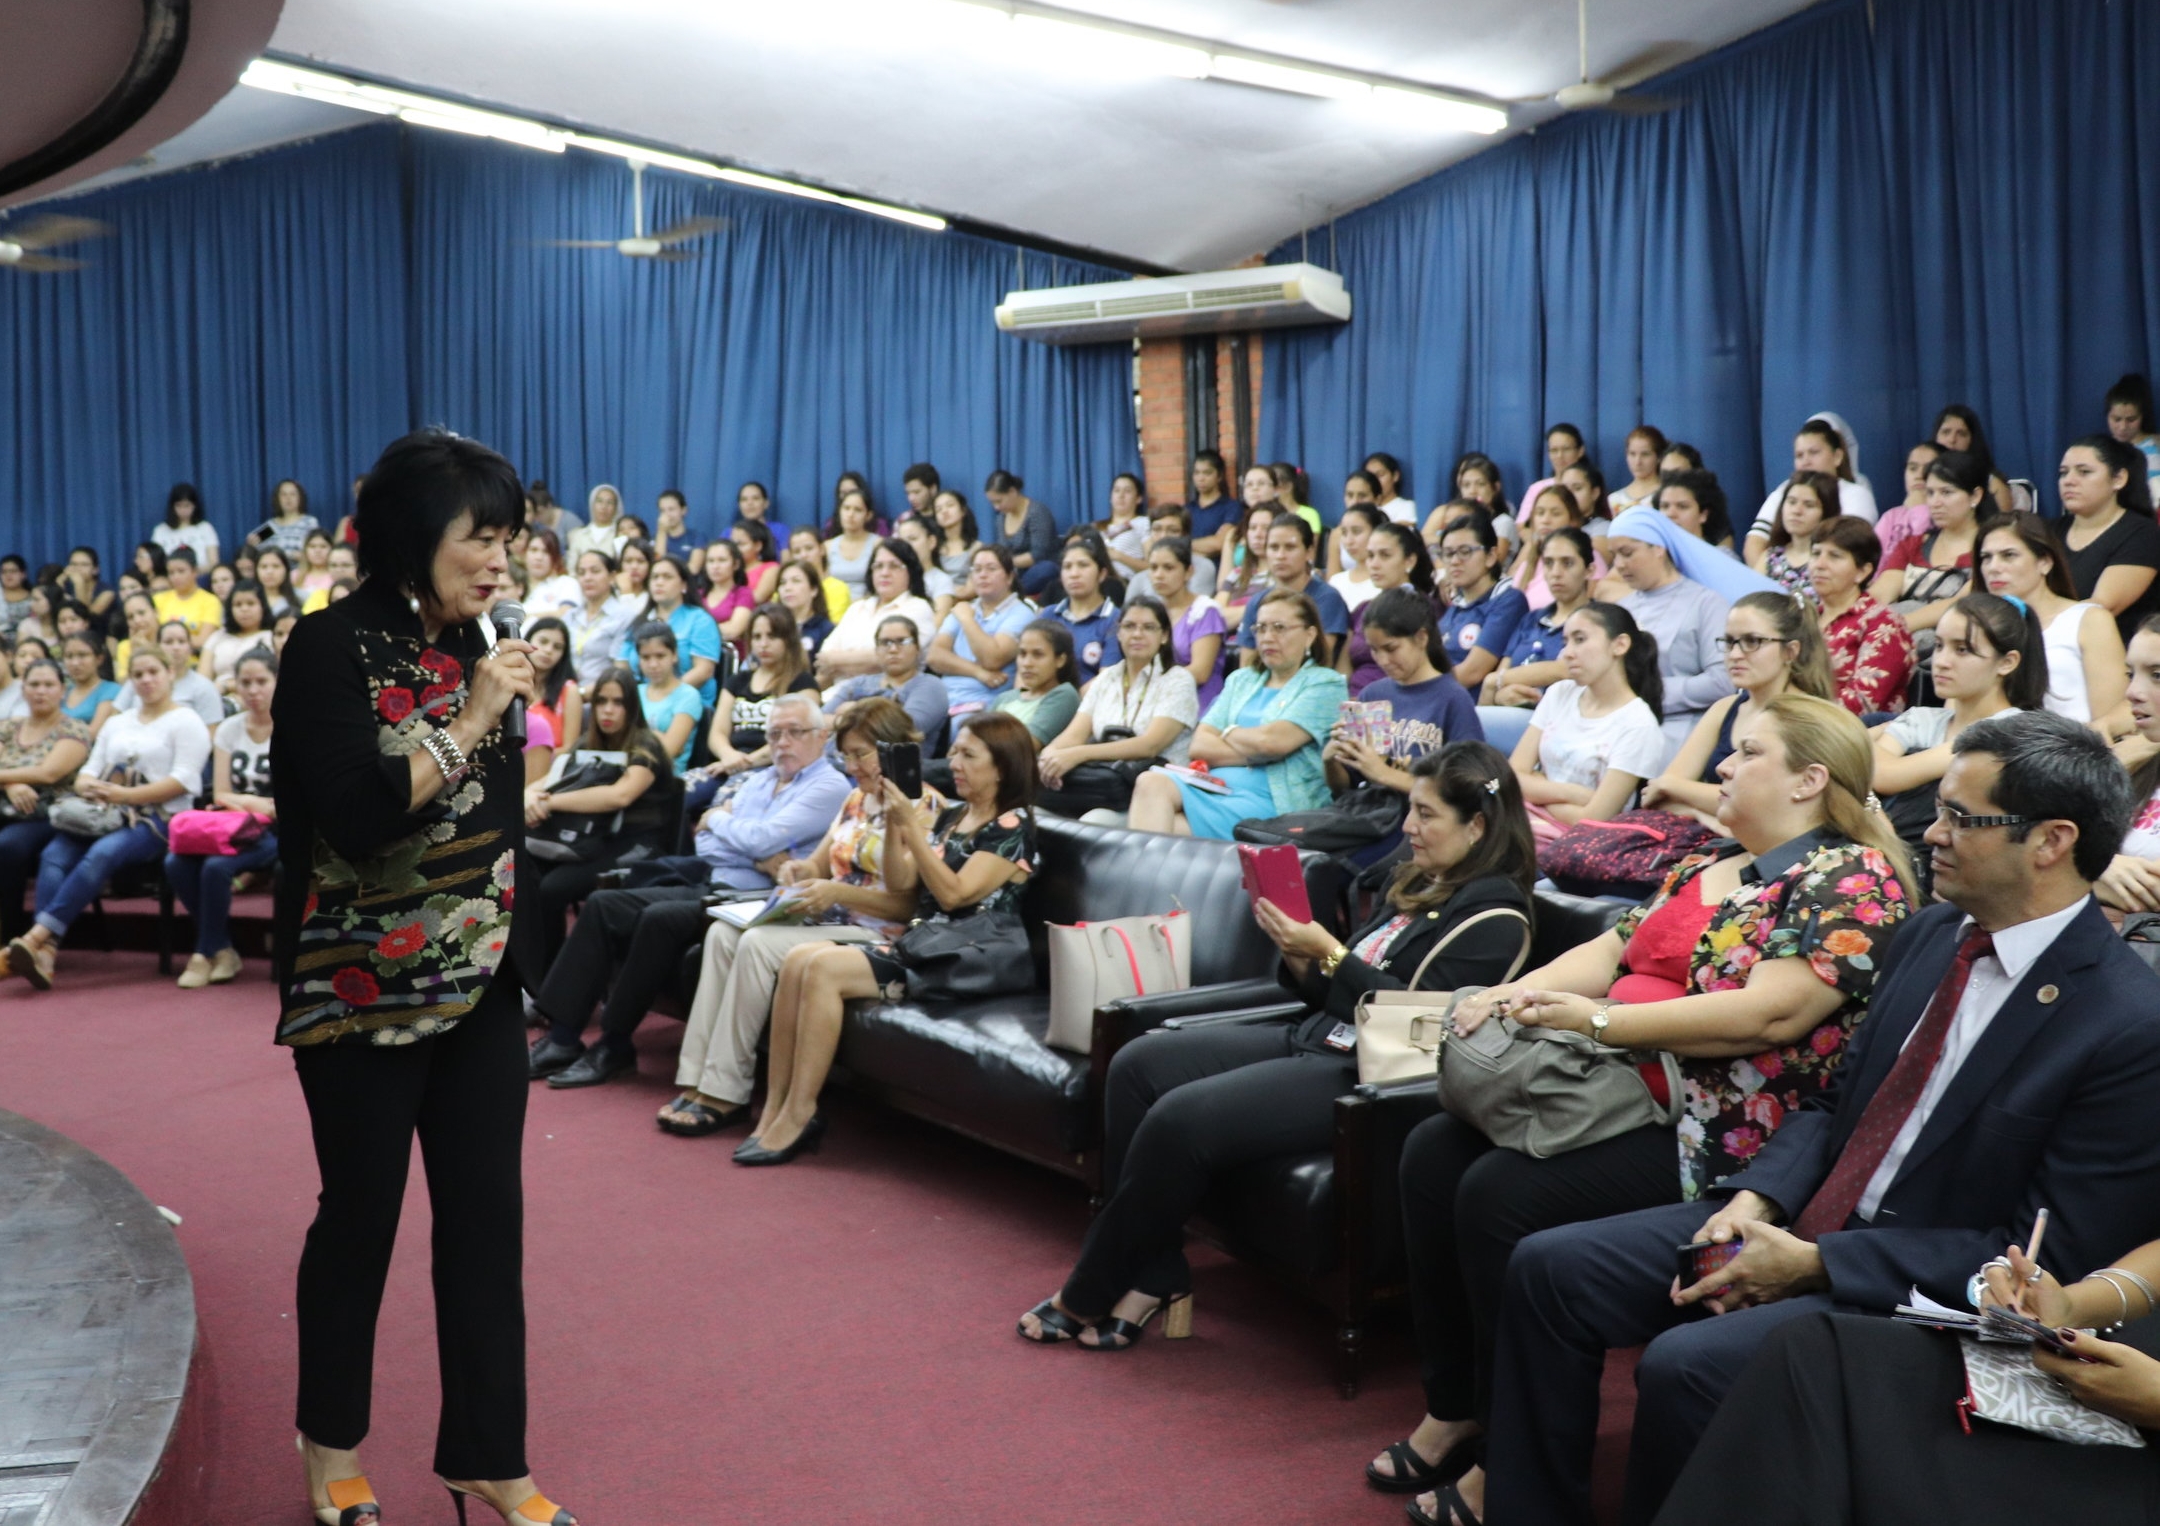 Image of a female Specialist with chin-length black hair speaking to an audience using a microphone.